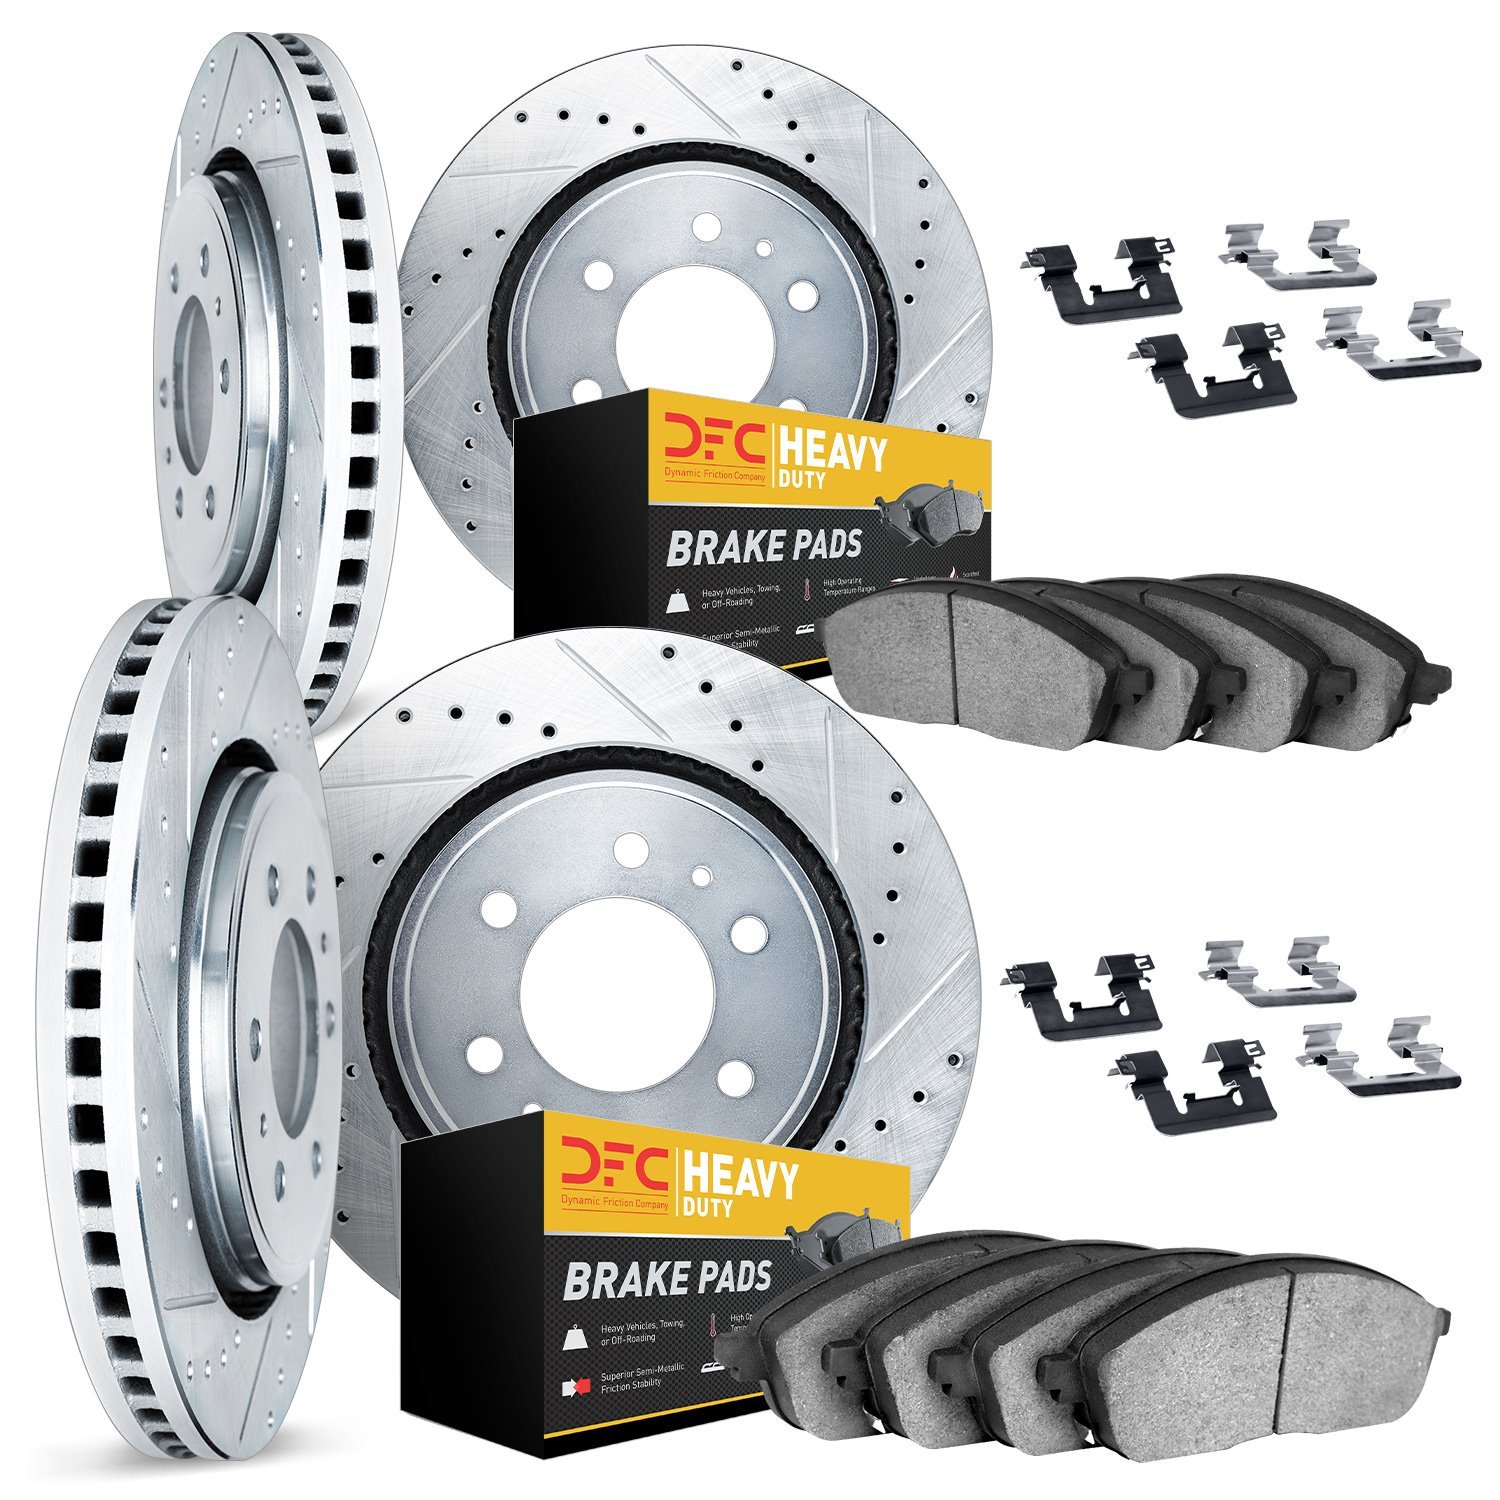 7214-54065 Drilled/Slotted Rotors w/Heavy-Duty Brake Pads Kit & Hardware [Silver], 2004-2008 Ford/Lincoln/Mercury/Mazda, Positio